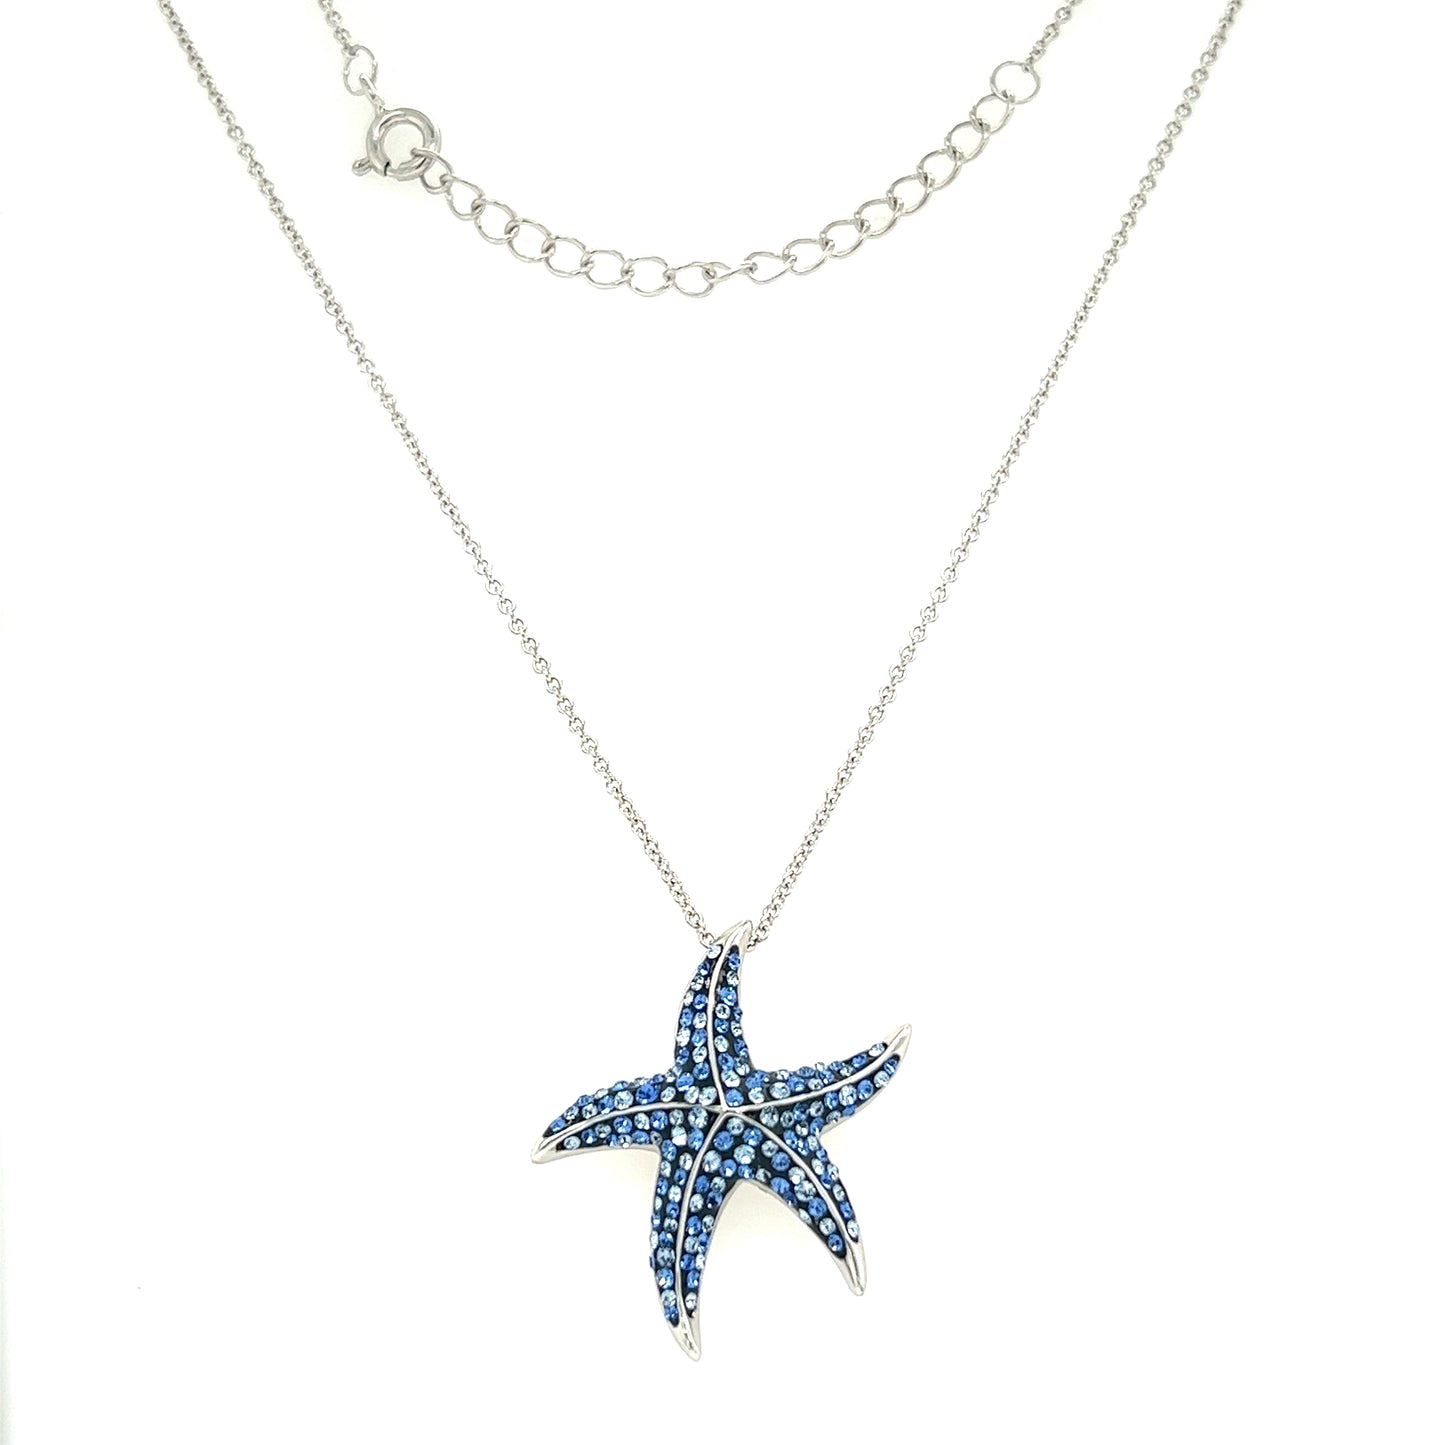 Blue Starfish Necklace with Aqua and White Crystals in Sterling Silver Full Necklace Front View